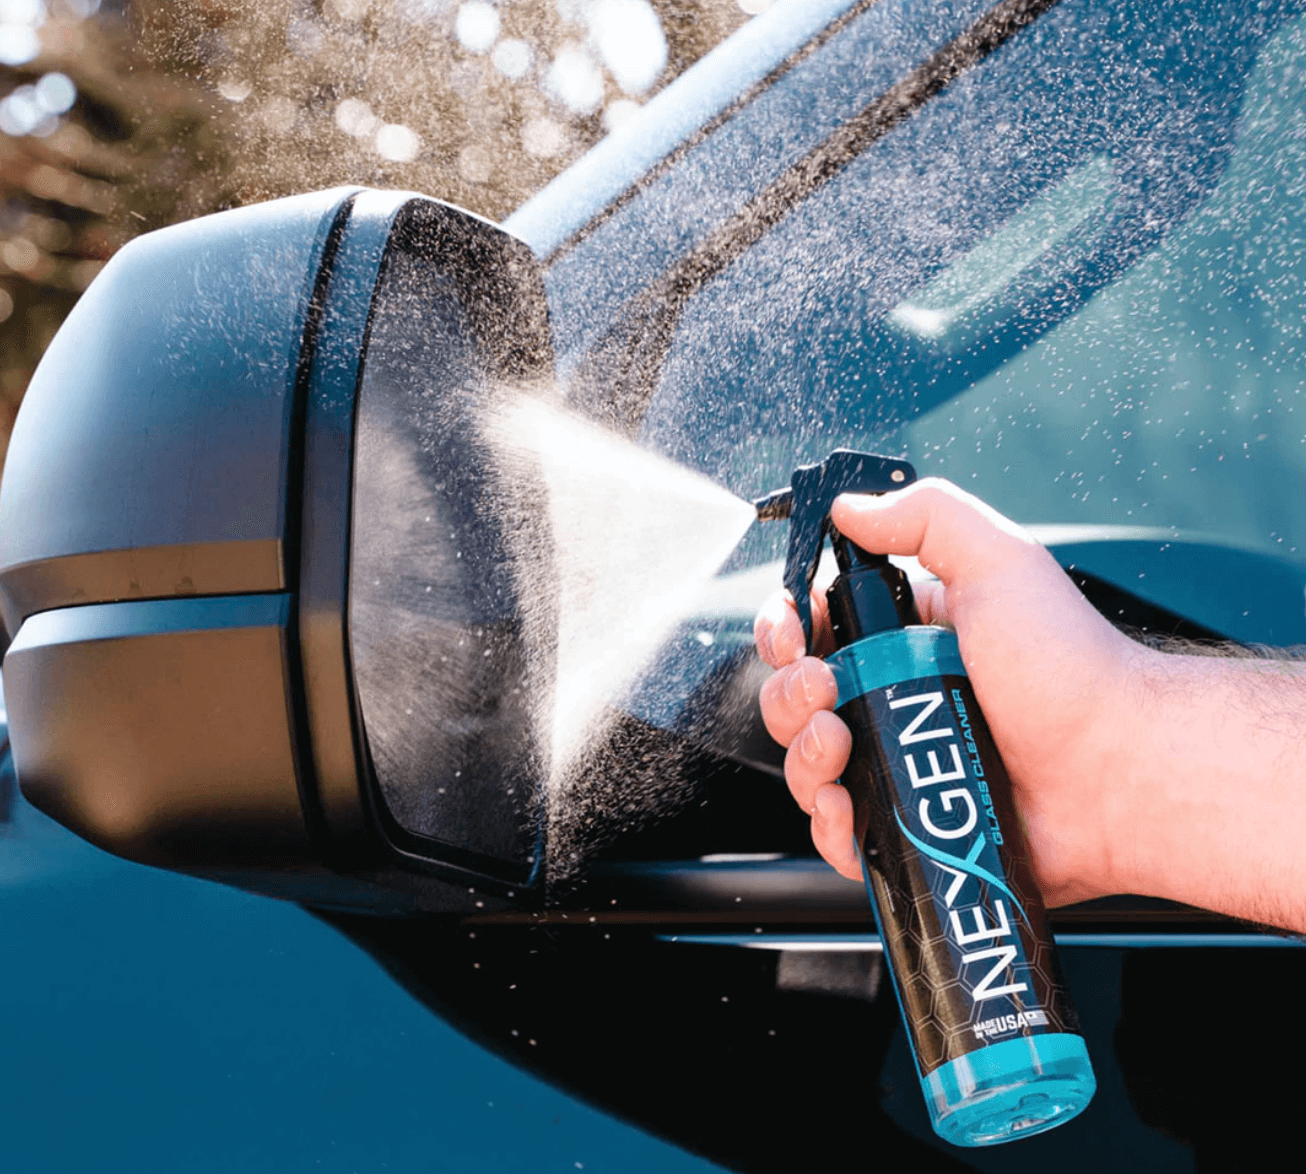 clean the glass with nexgen glass cleaner